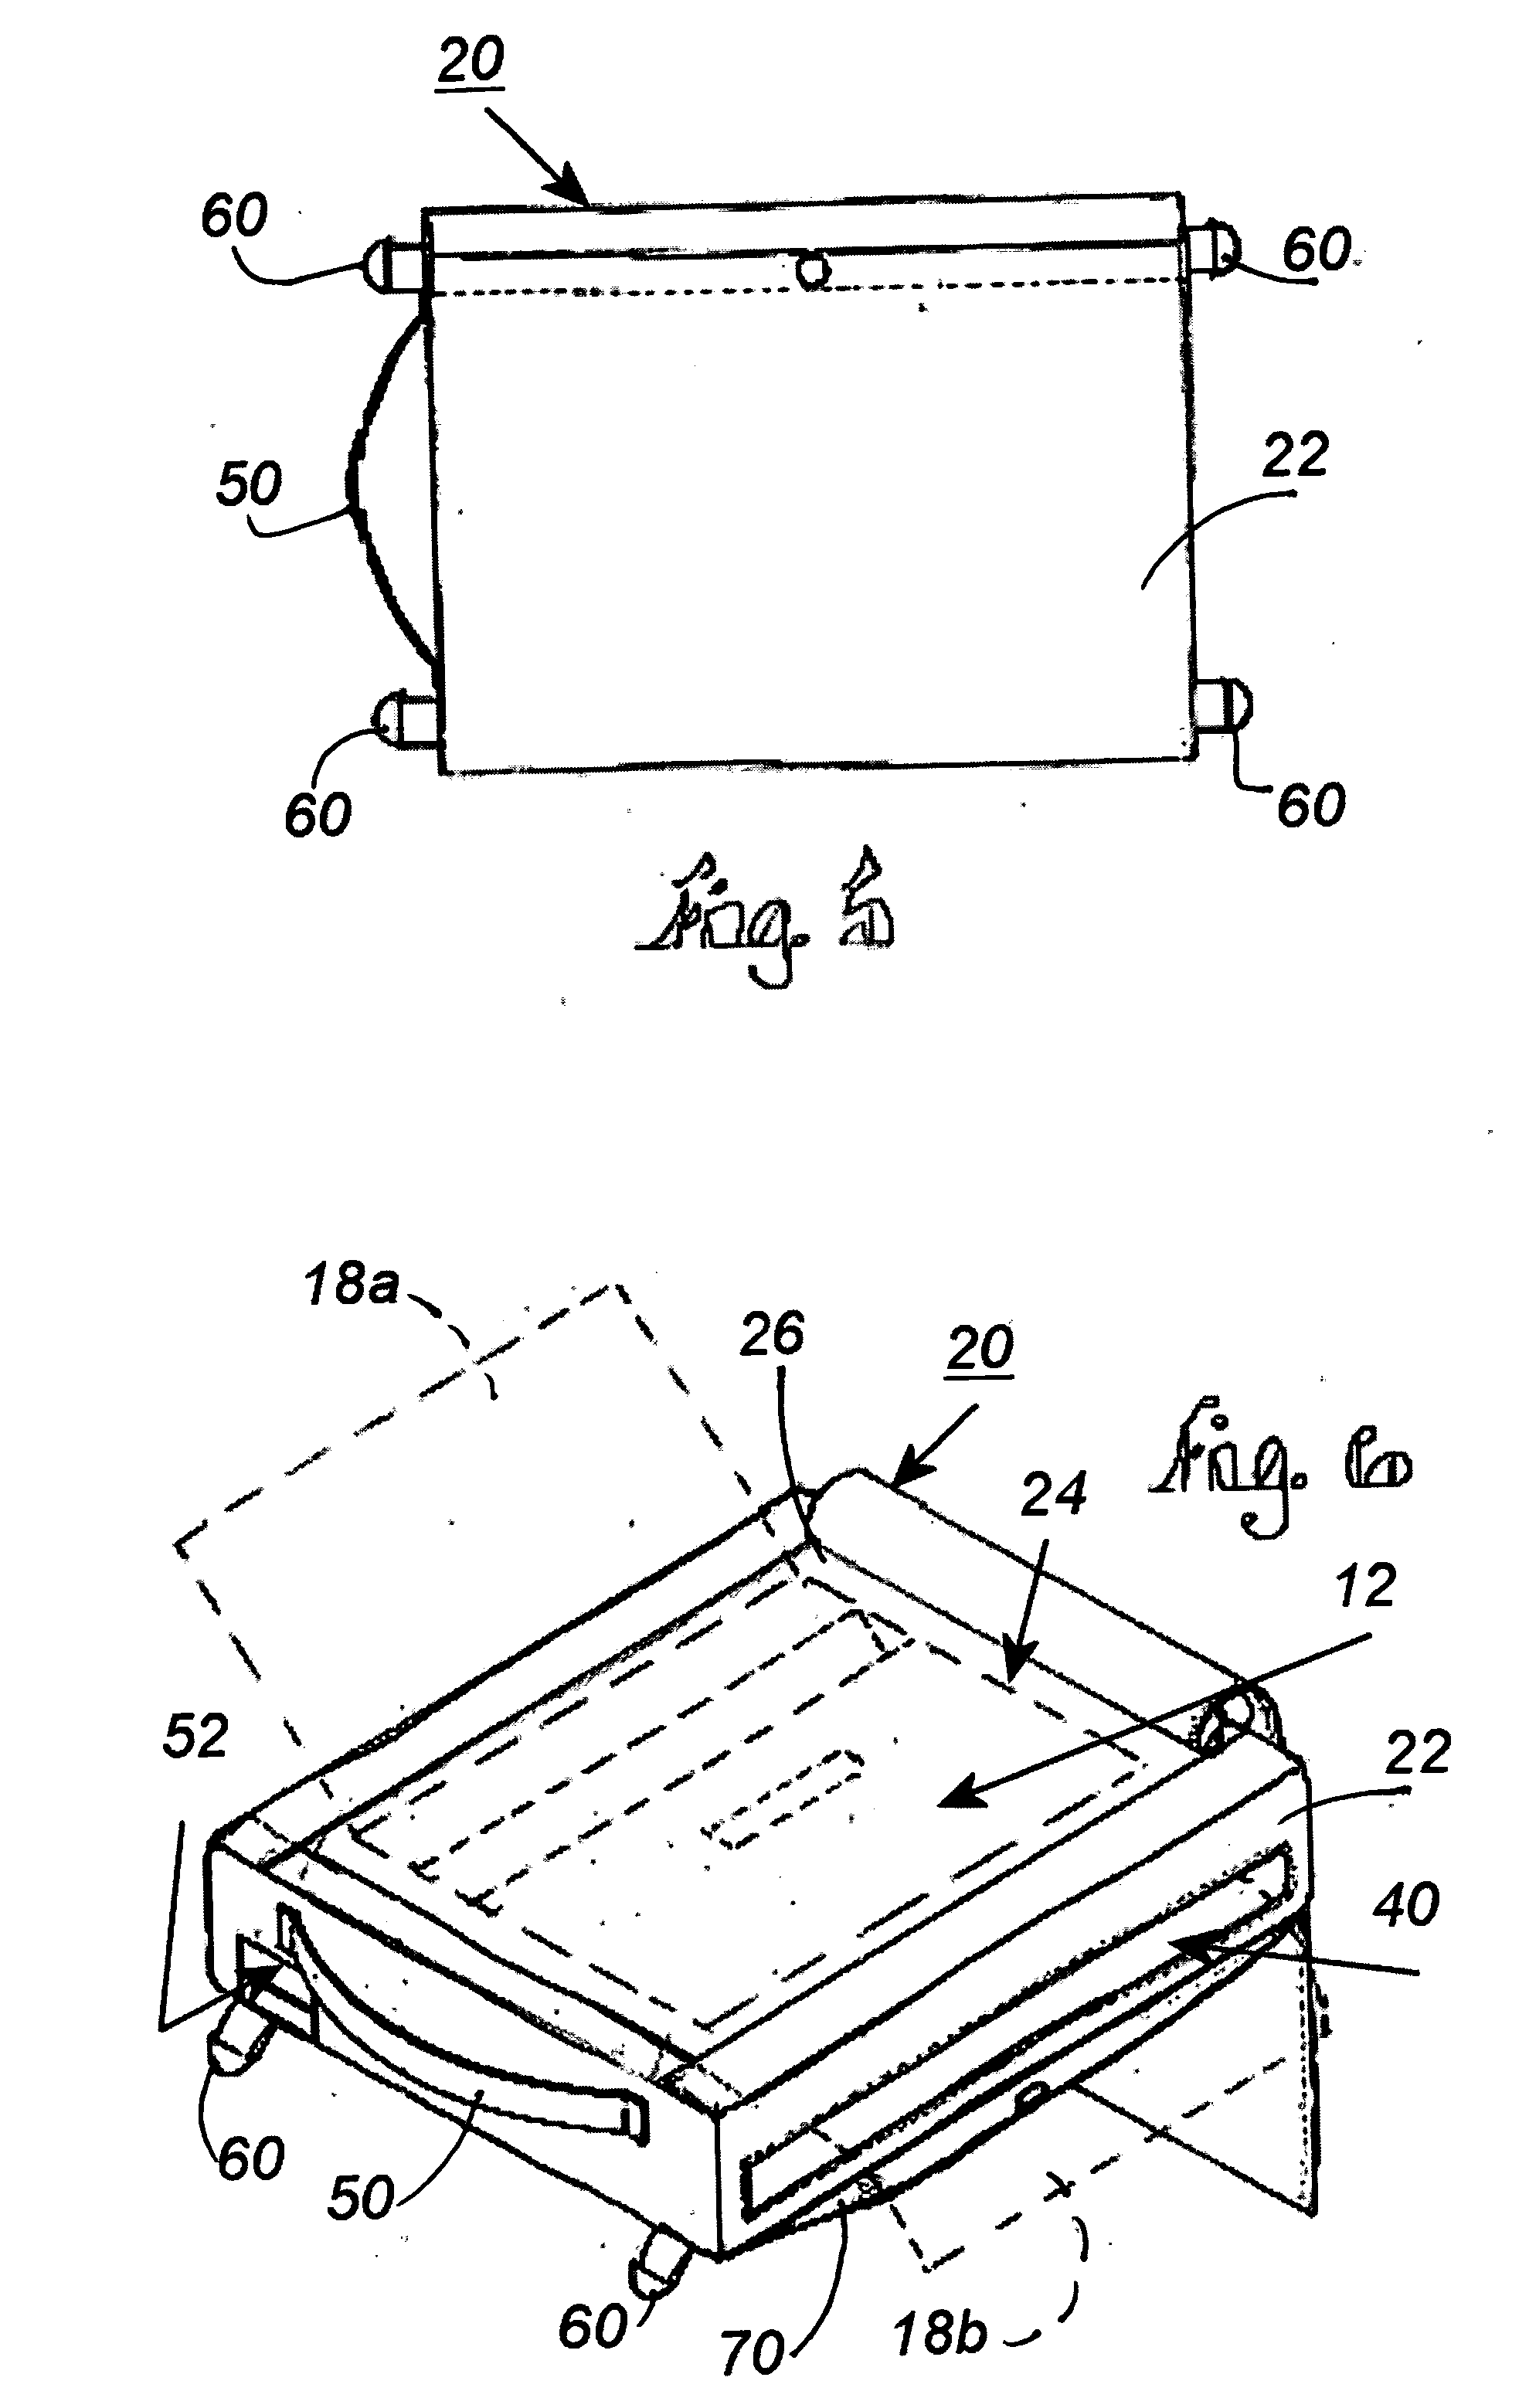 Portable photographic printing method and apparatus